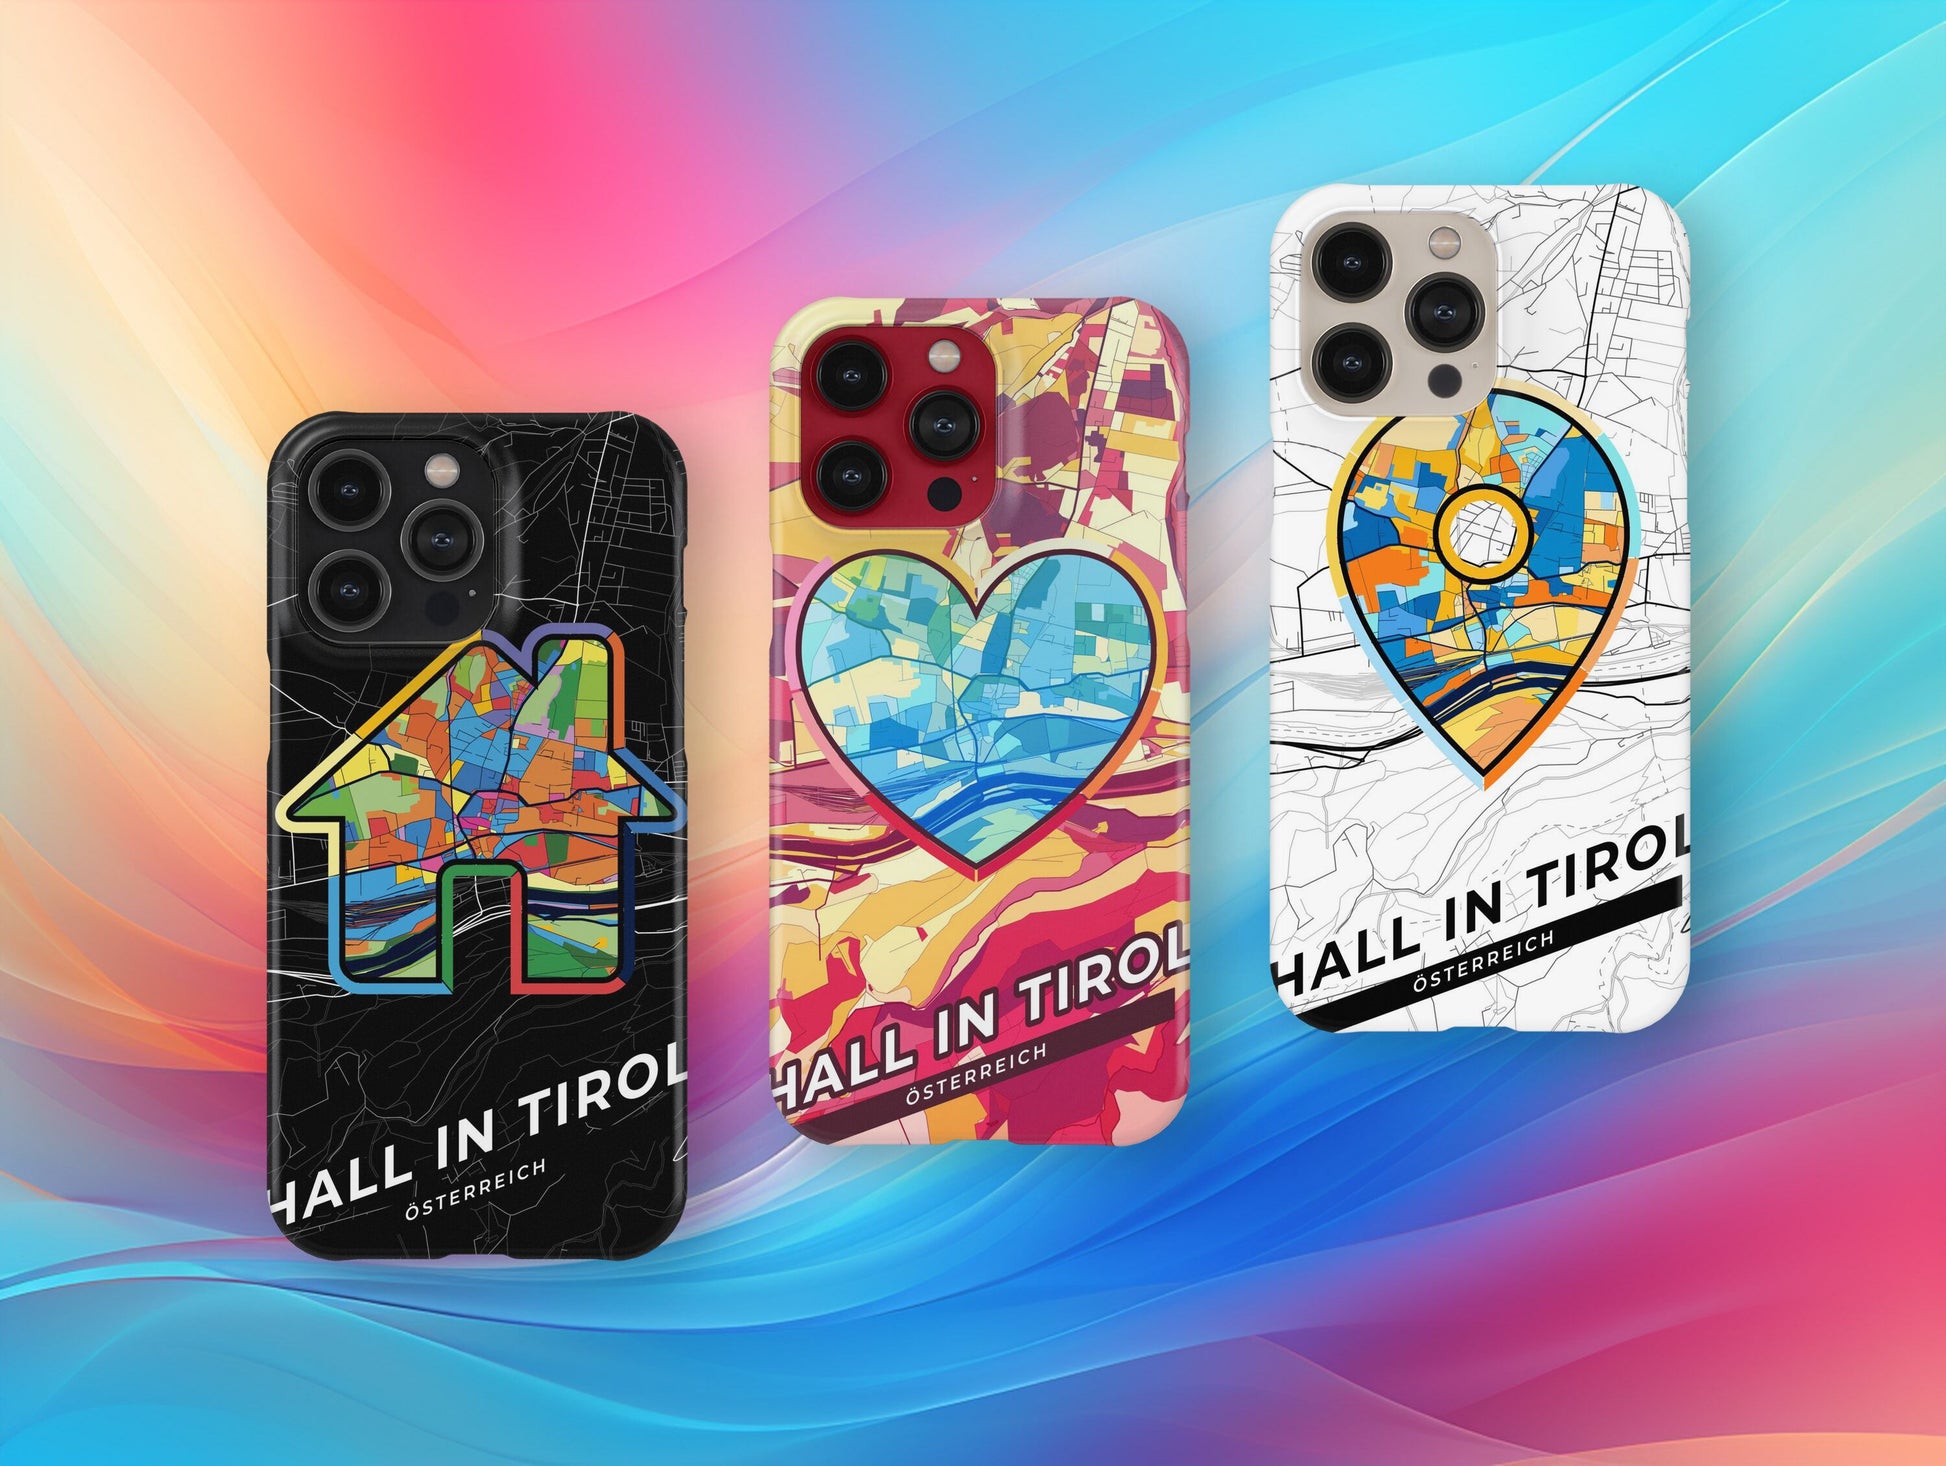 Hall In Tirol Österreich slim phone case with colorful icon. Birthday, wedding or housewarming gift. Couple match cases.